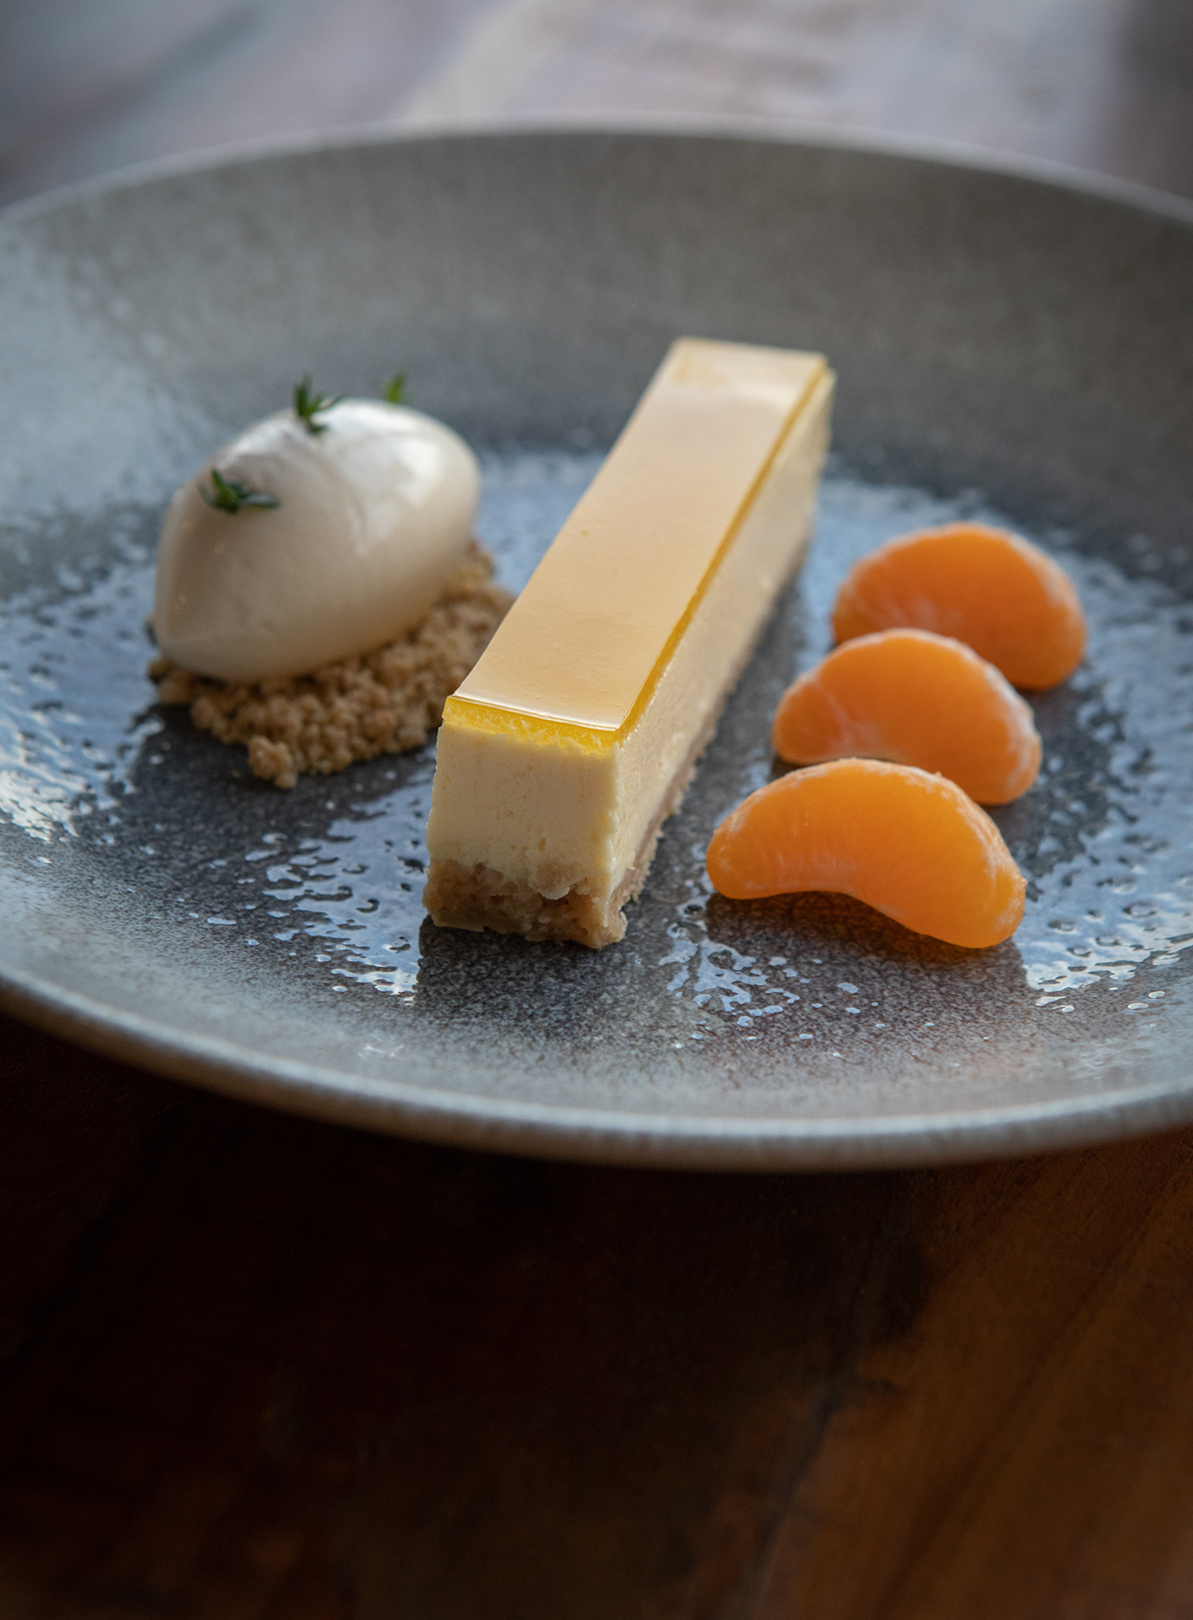 Clementine cheesecake with ice cream and orange segments by Polly Baldwin